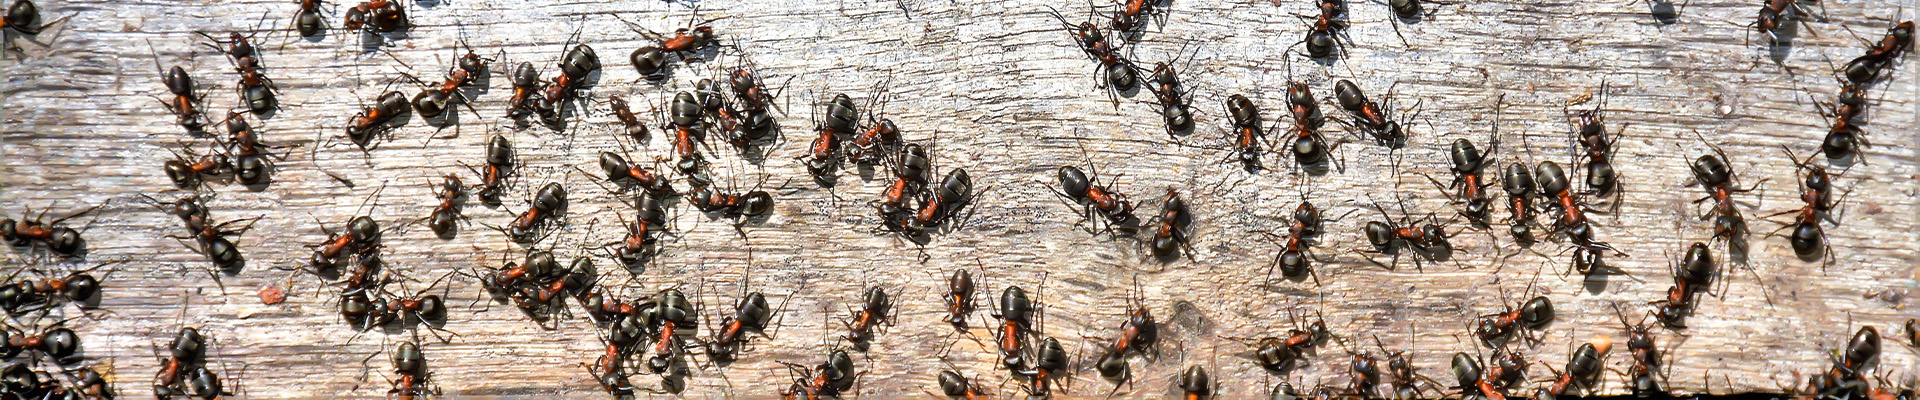 Ant Control Page Header